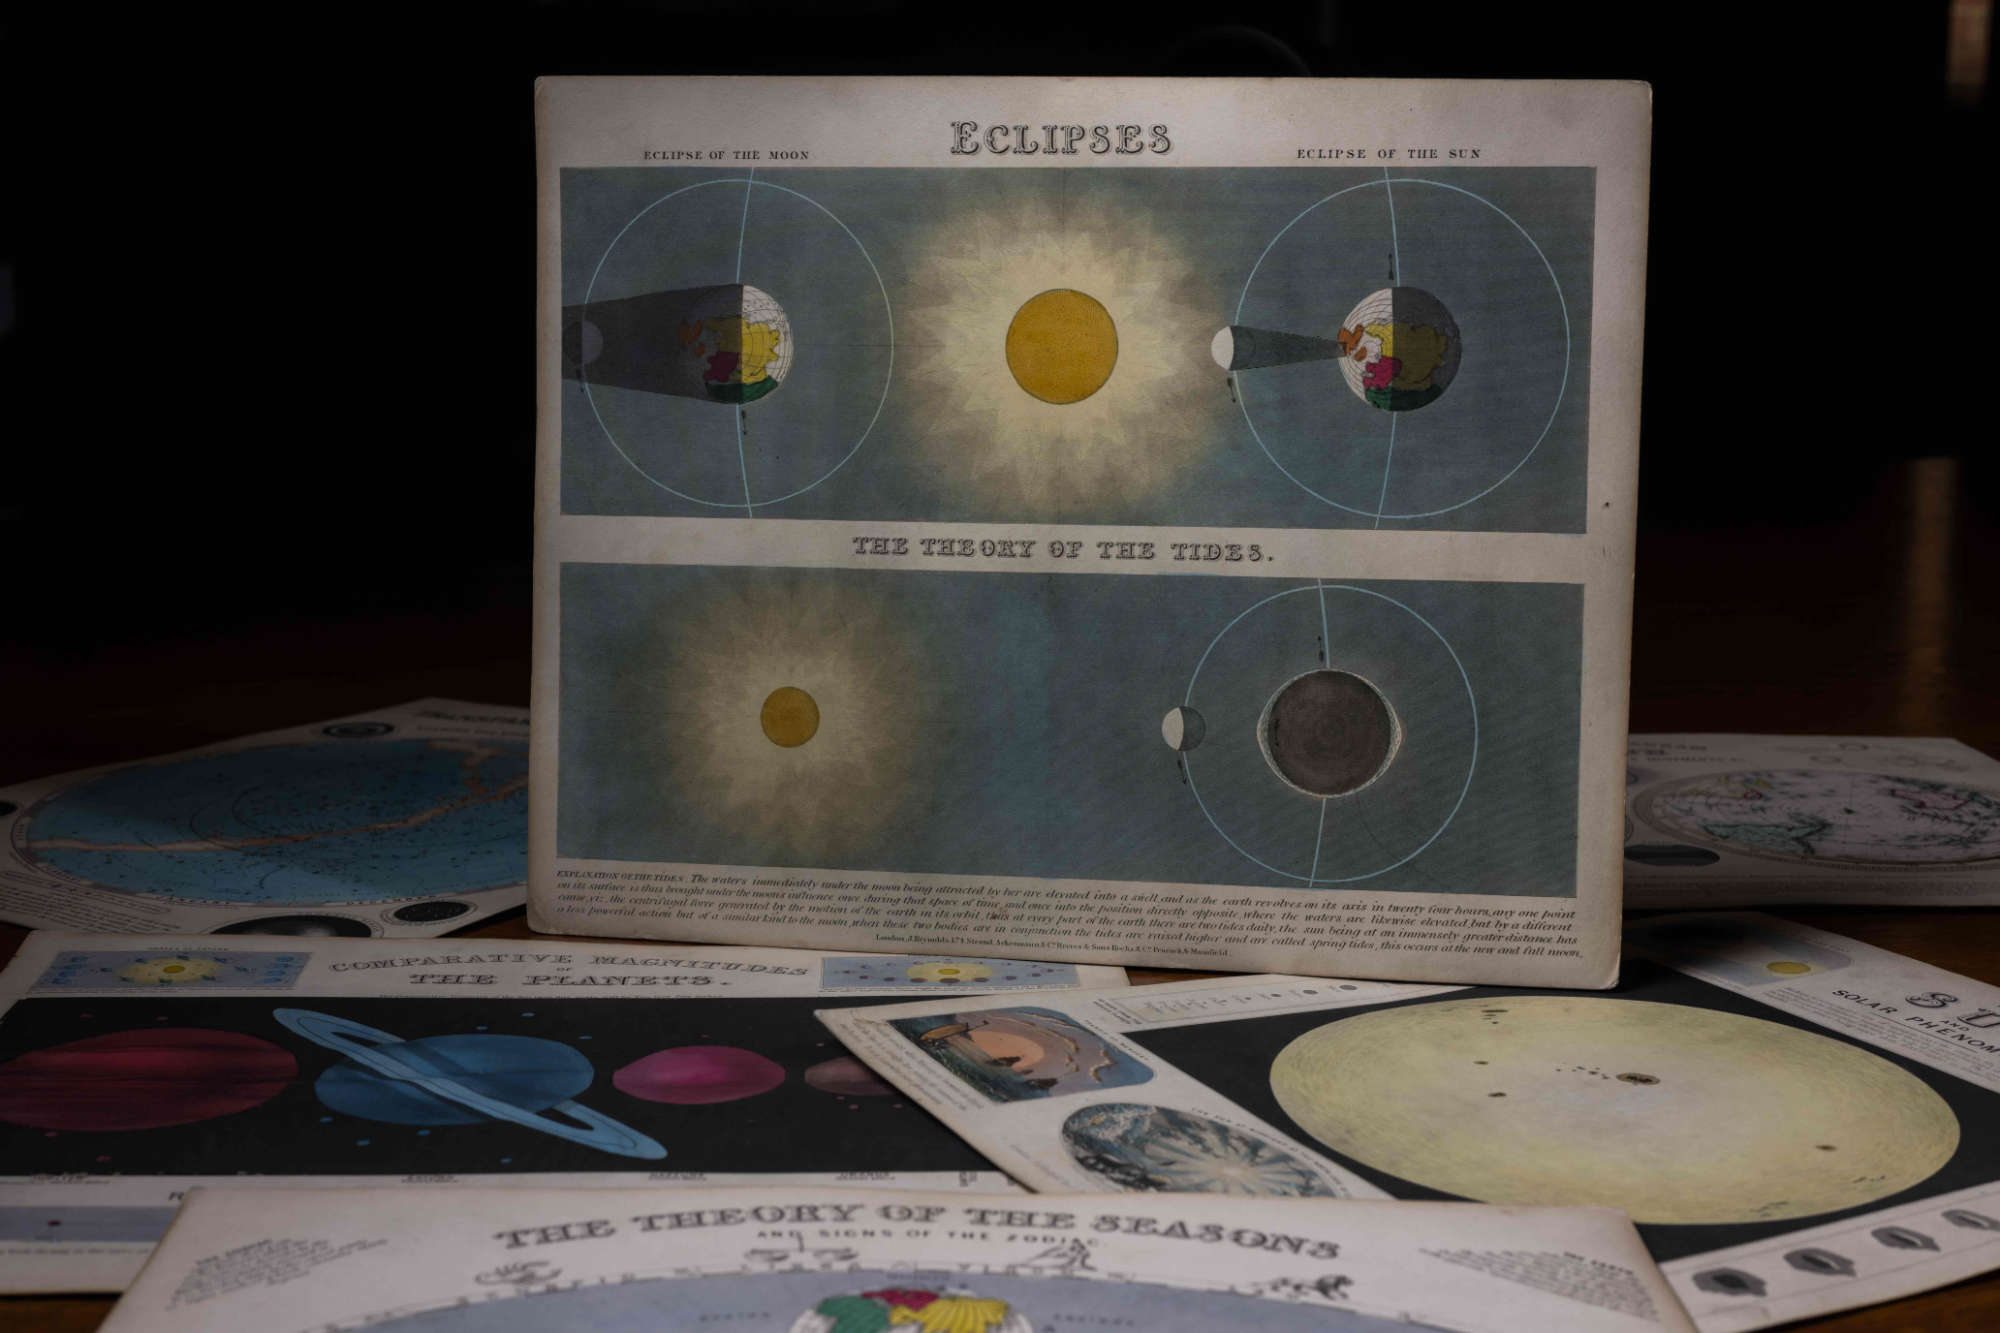 Several pictures containing colorful depictions of geology, history, planets, and other astronomical phenomena were laid flat on a table and a picture about eclipses was displayed vertically.